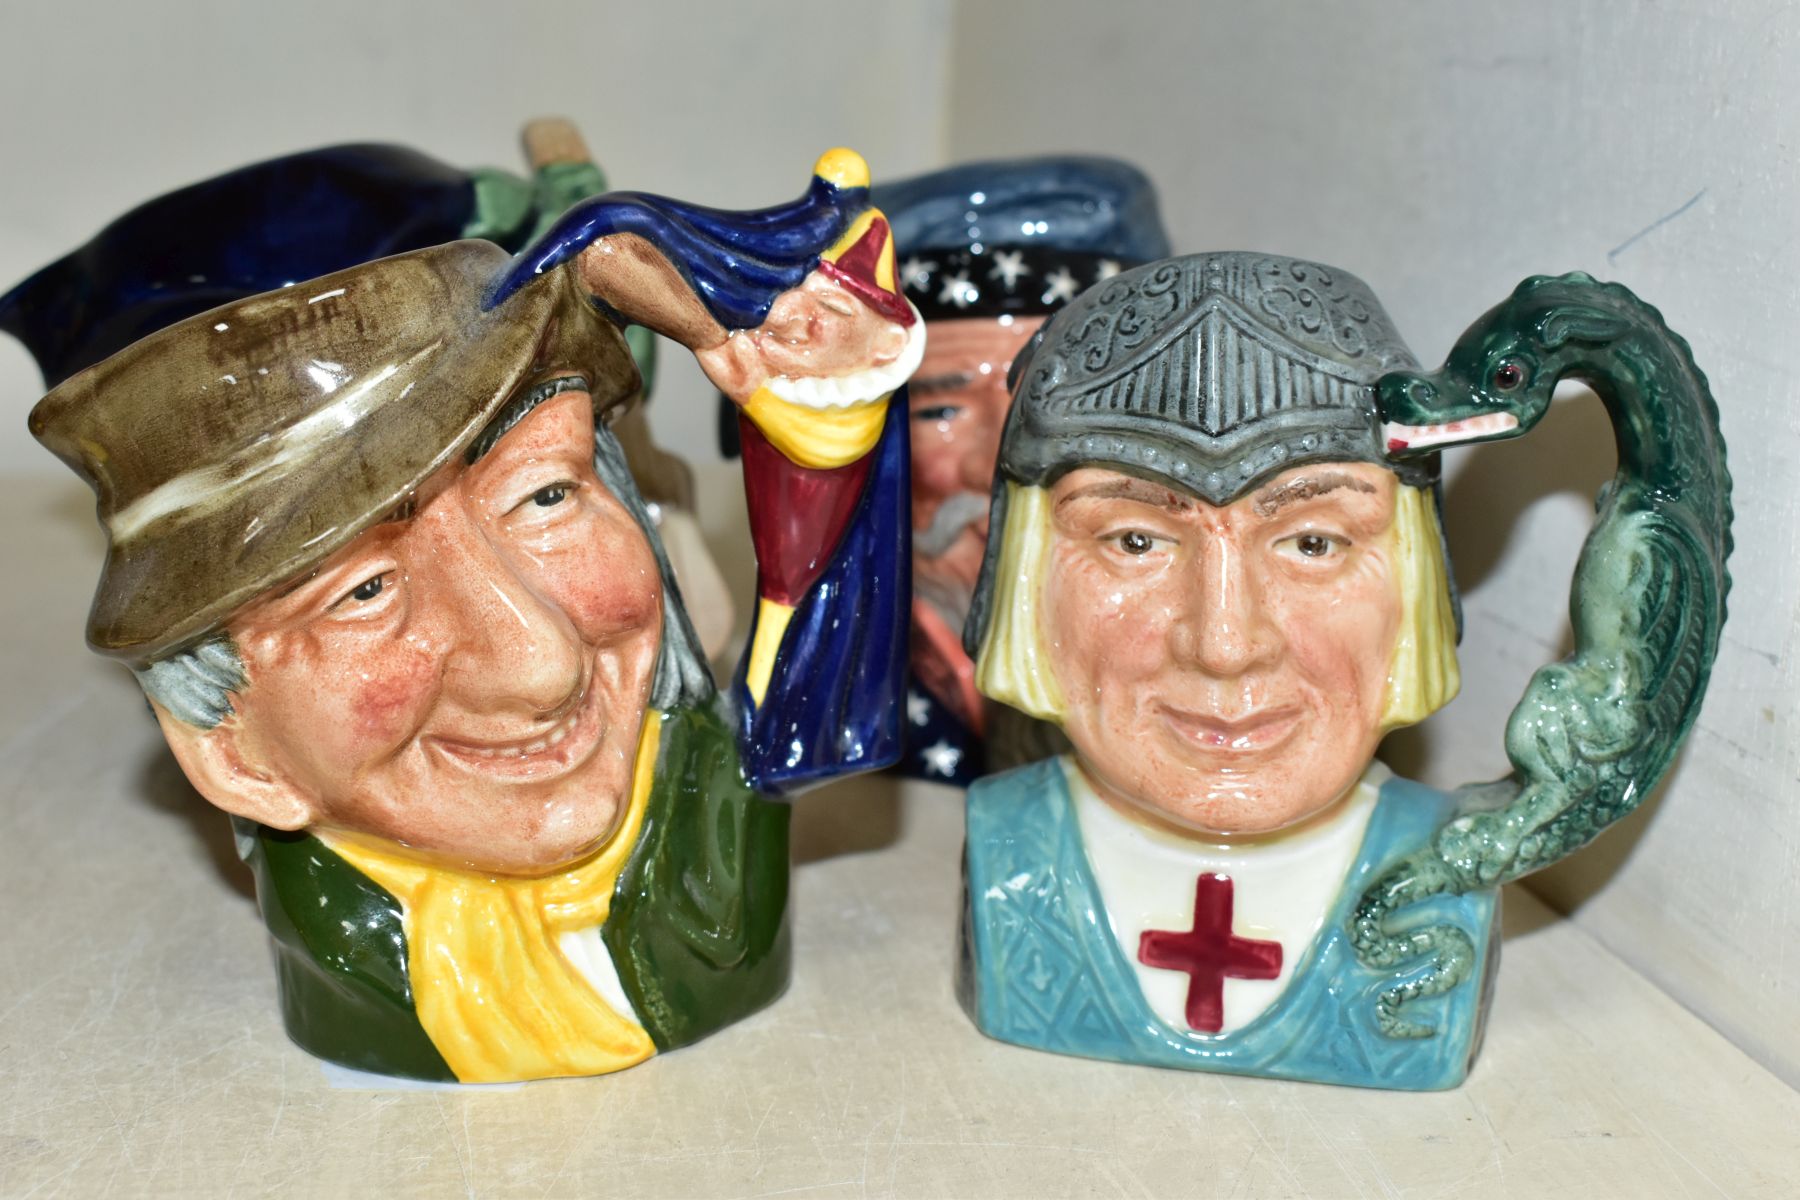 SIX SMALL ROYAL DOULTON CHARACTER JUGS, The Fortune Teller D6503 style one, Mikado D6507, Punch & - Image 3 of 5